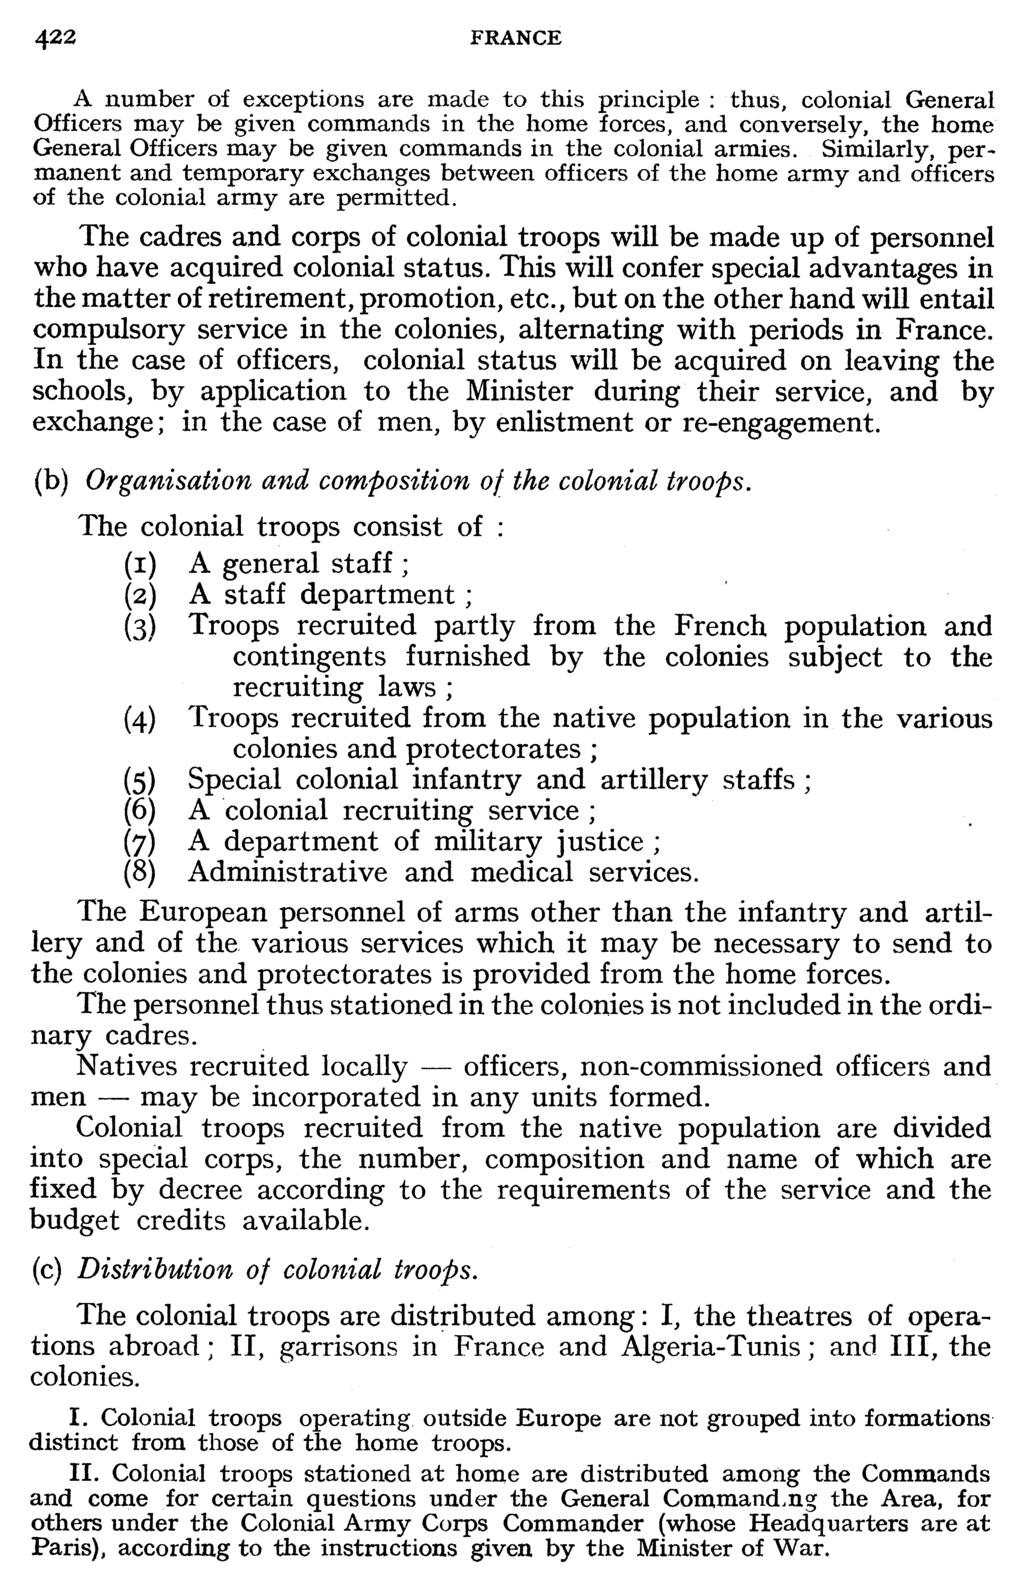 422 FRANCE A number of exceptions are made to this principle: thus, colonial General Officers may be given commands in the home forces, and conversely, the home General Officers may be given commands